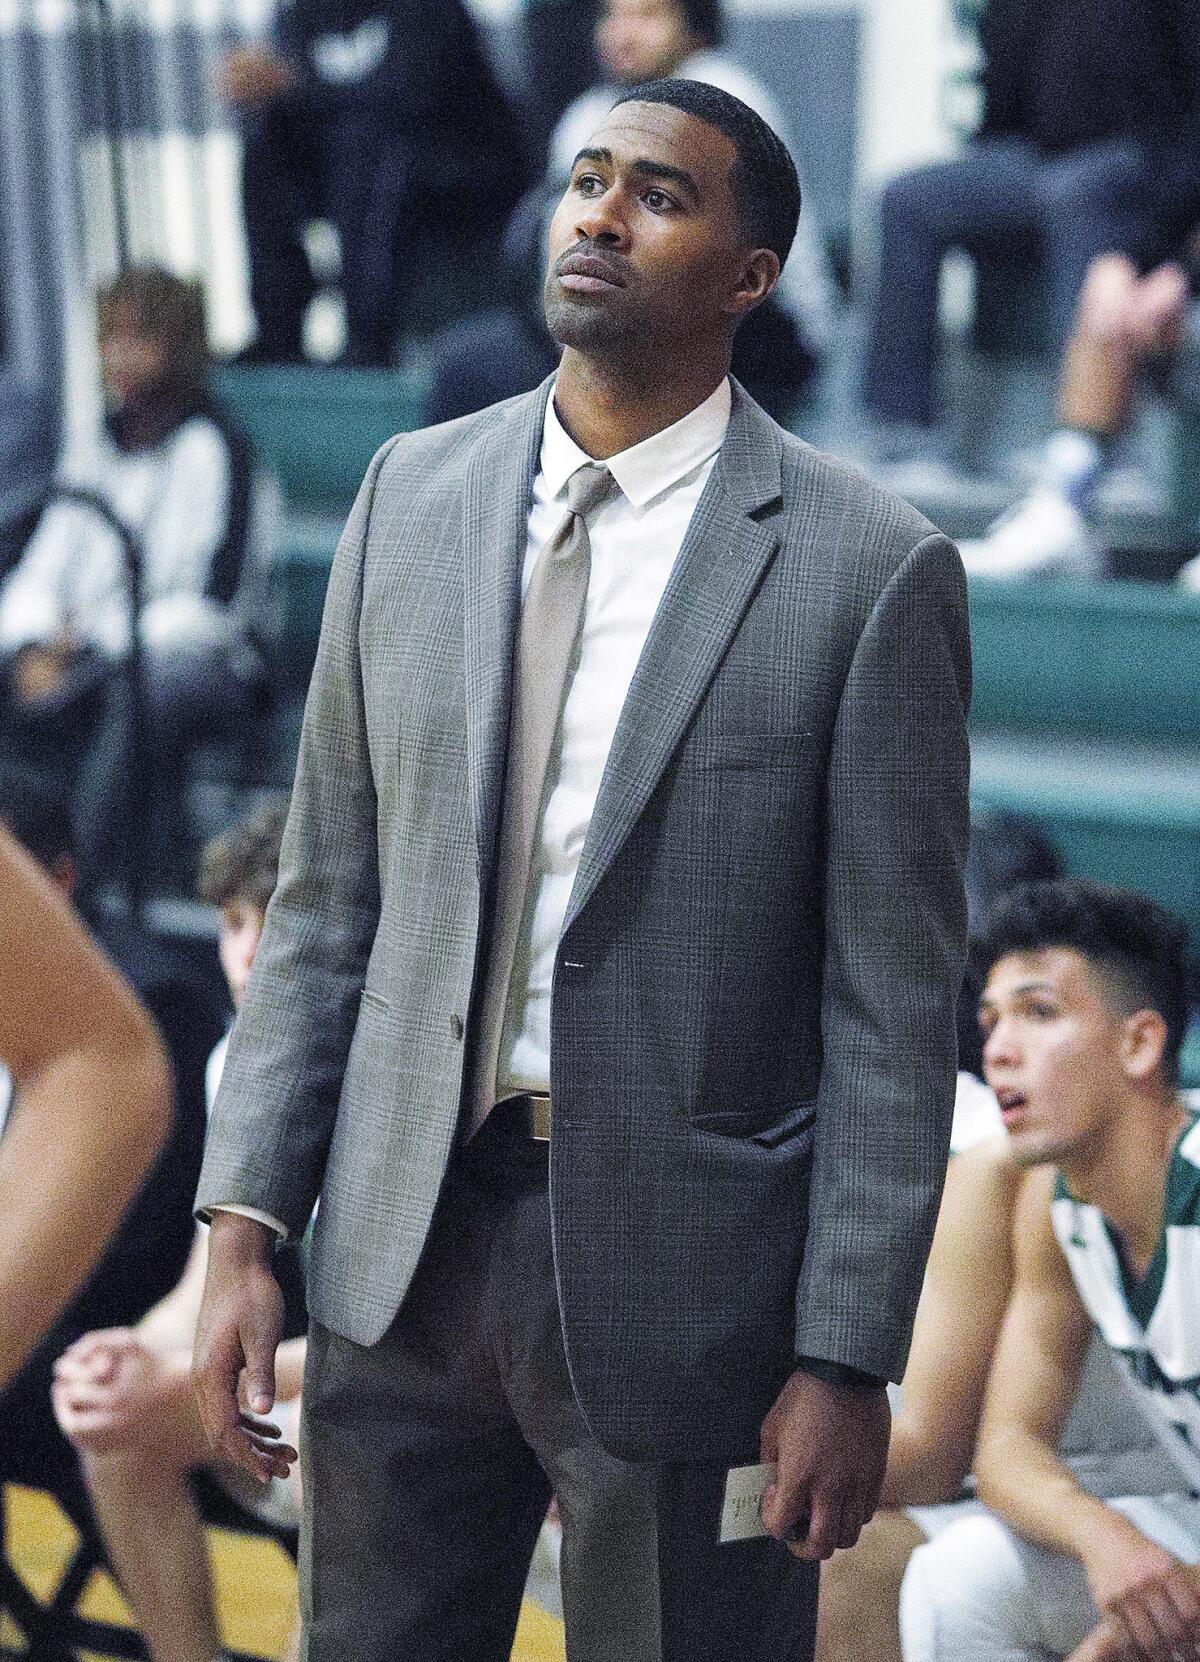 Providence head coach Brandon Lincoln helped guide the Pioneers to a wealth of success during the 2018-19 season.